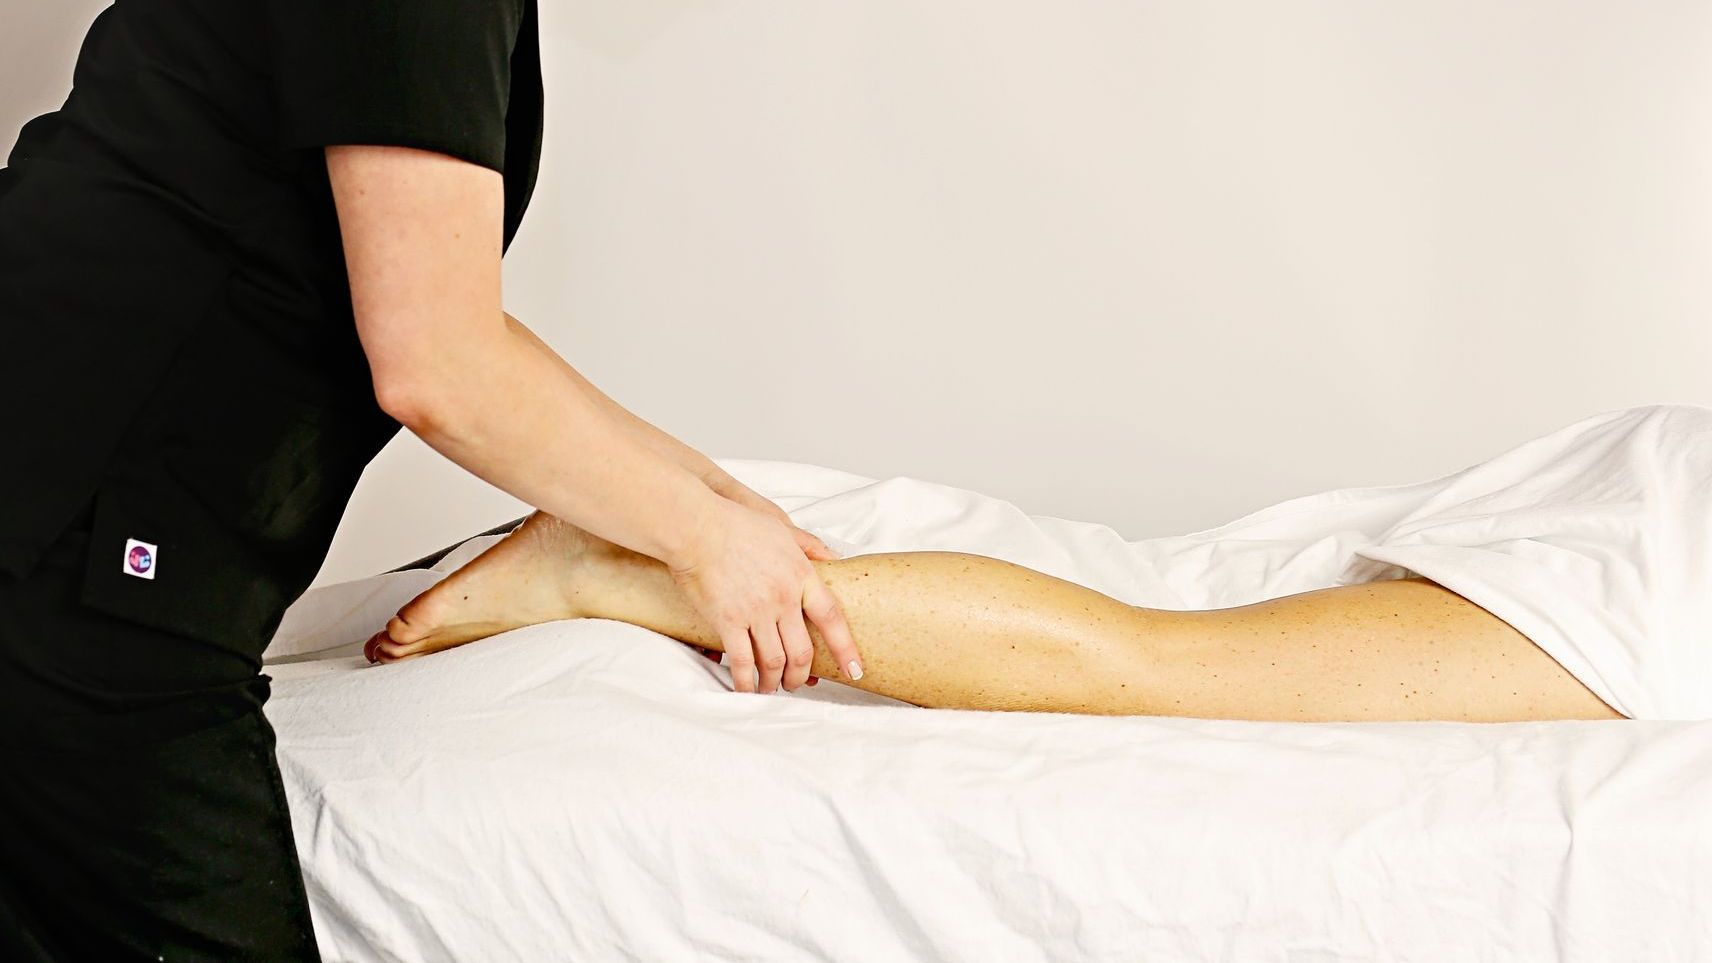 A woman is giving a leg massage to a person laying on a bed.